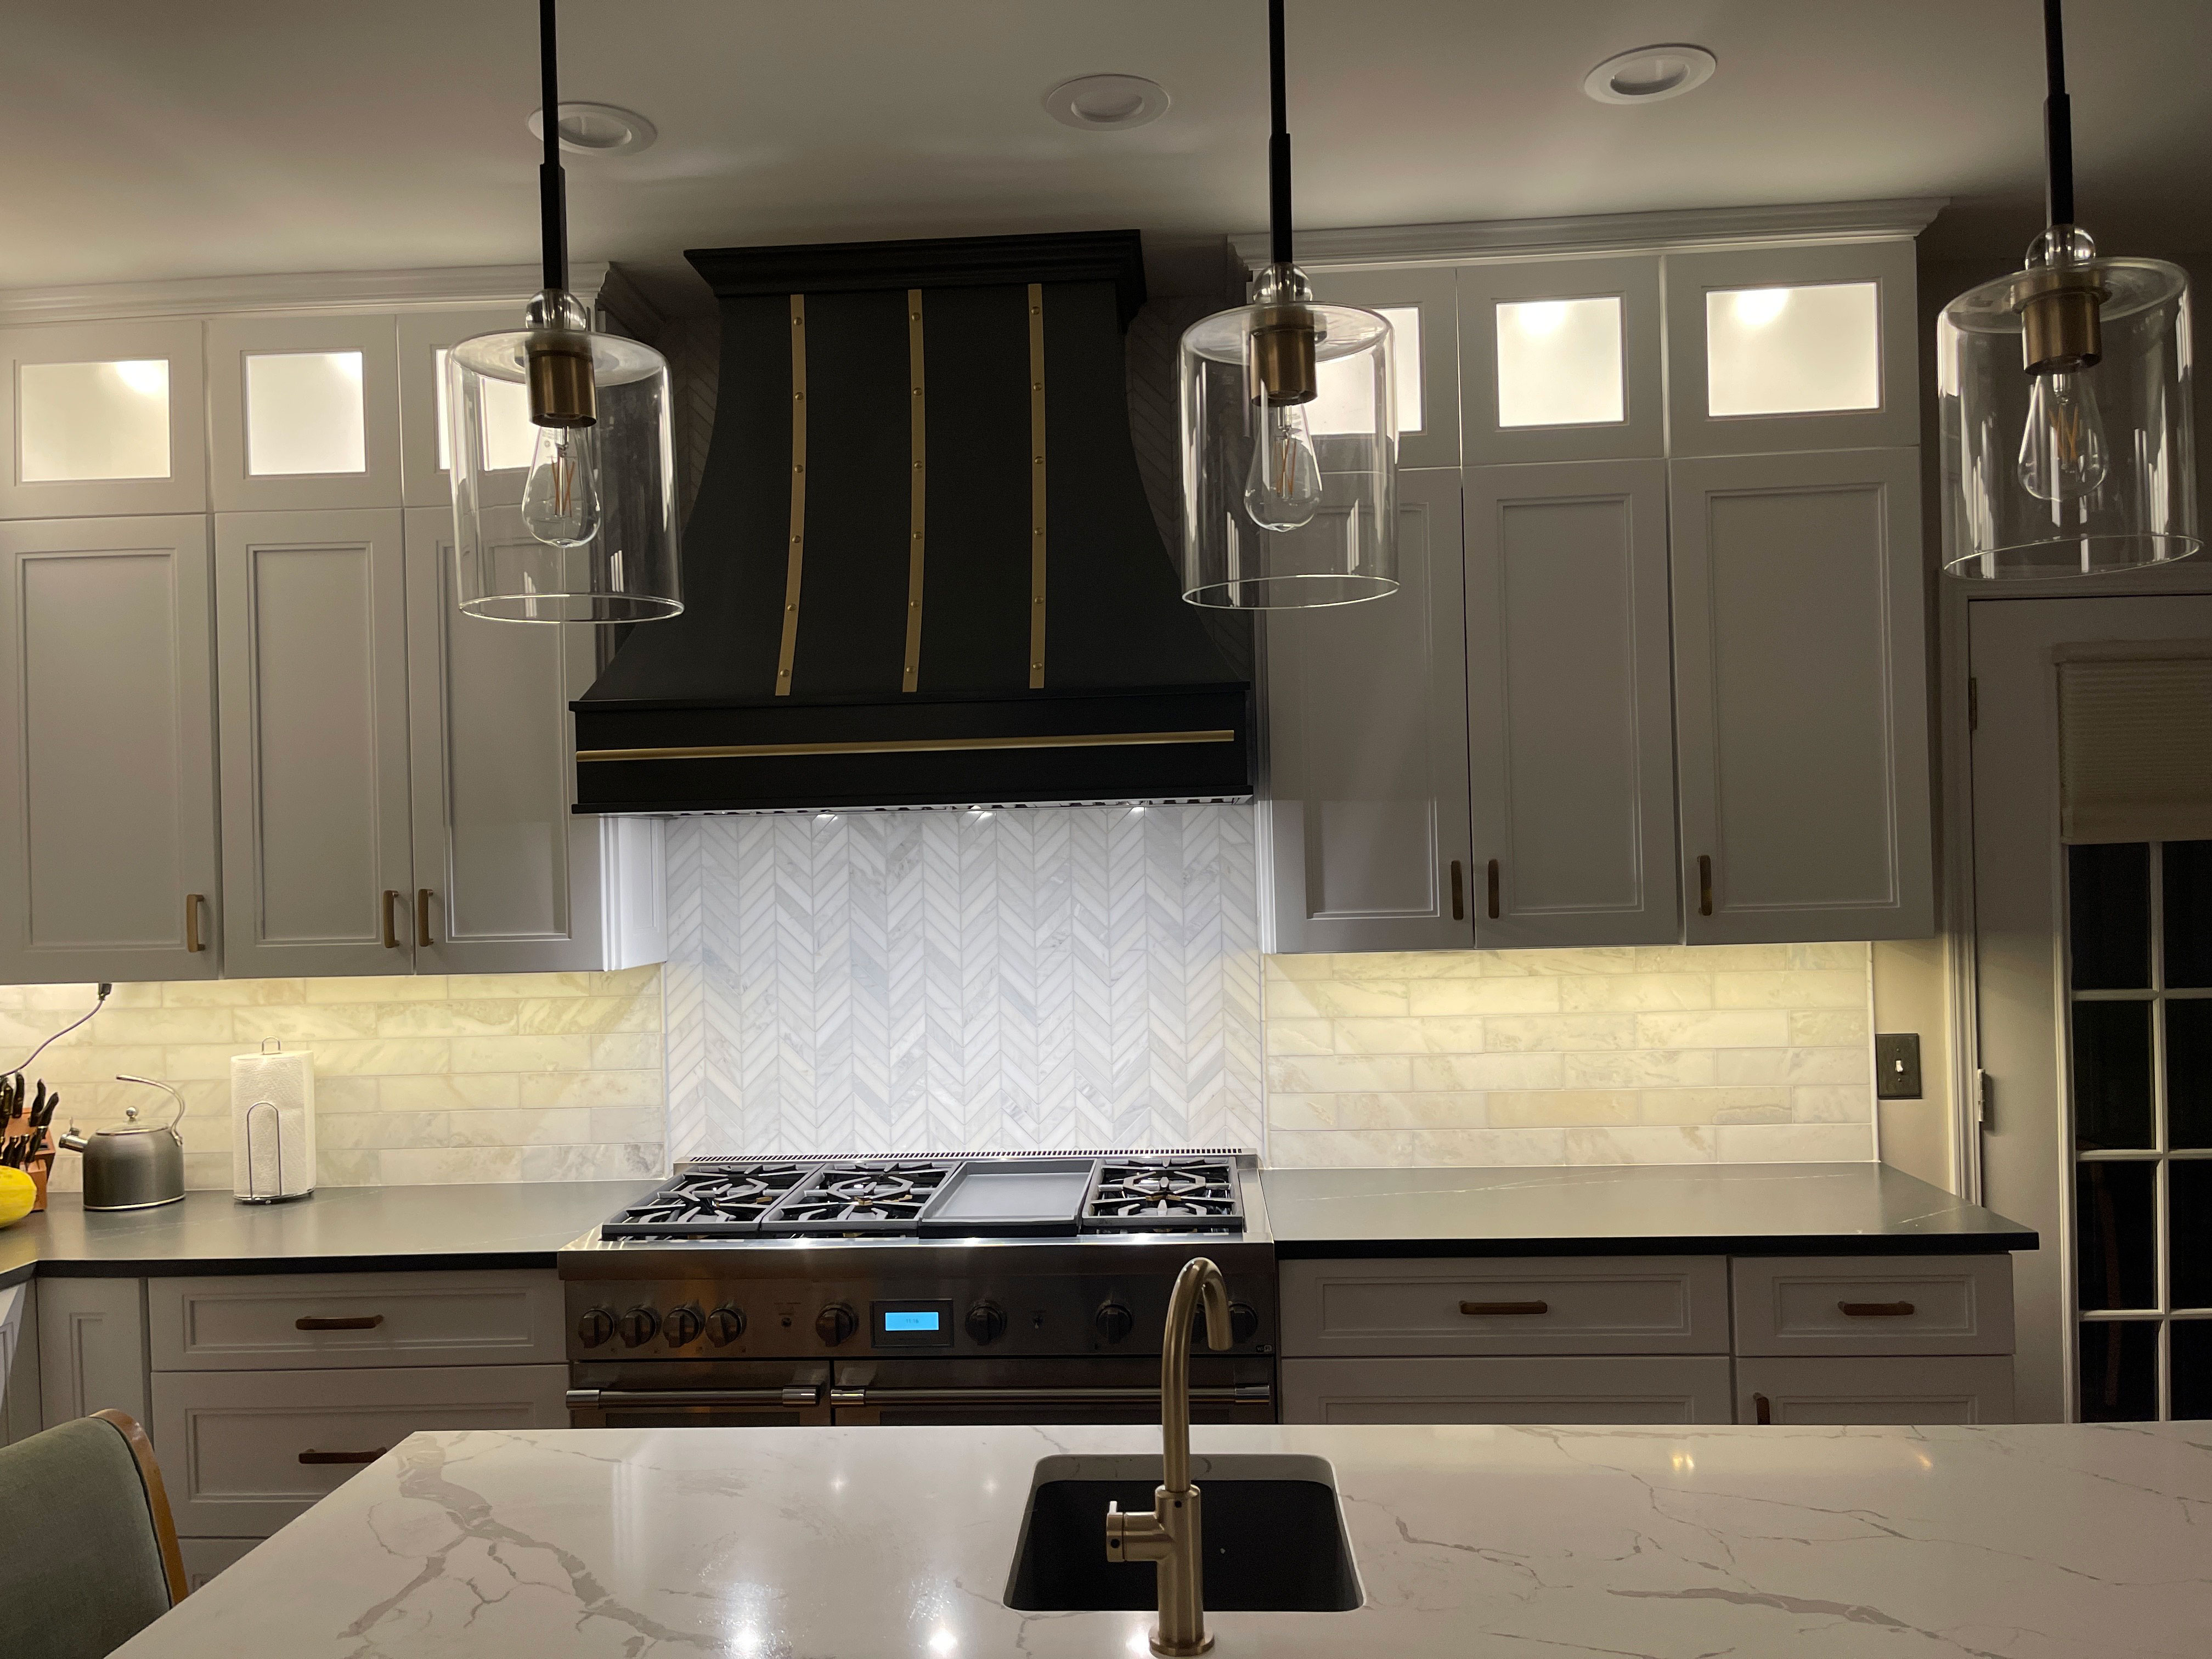 Modern kitchen with white cabinets, grey countertops, stylish brick backsplash, complemented by a chic range hood